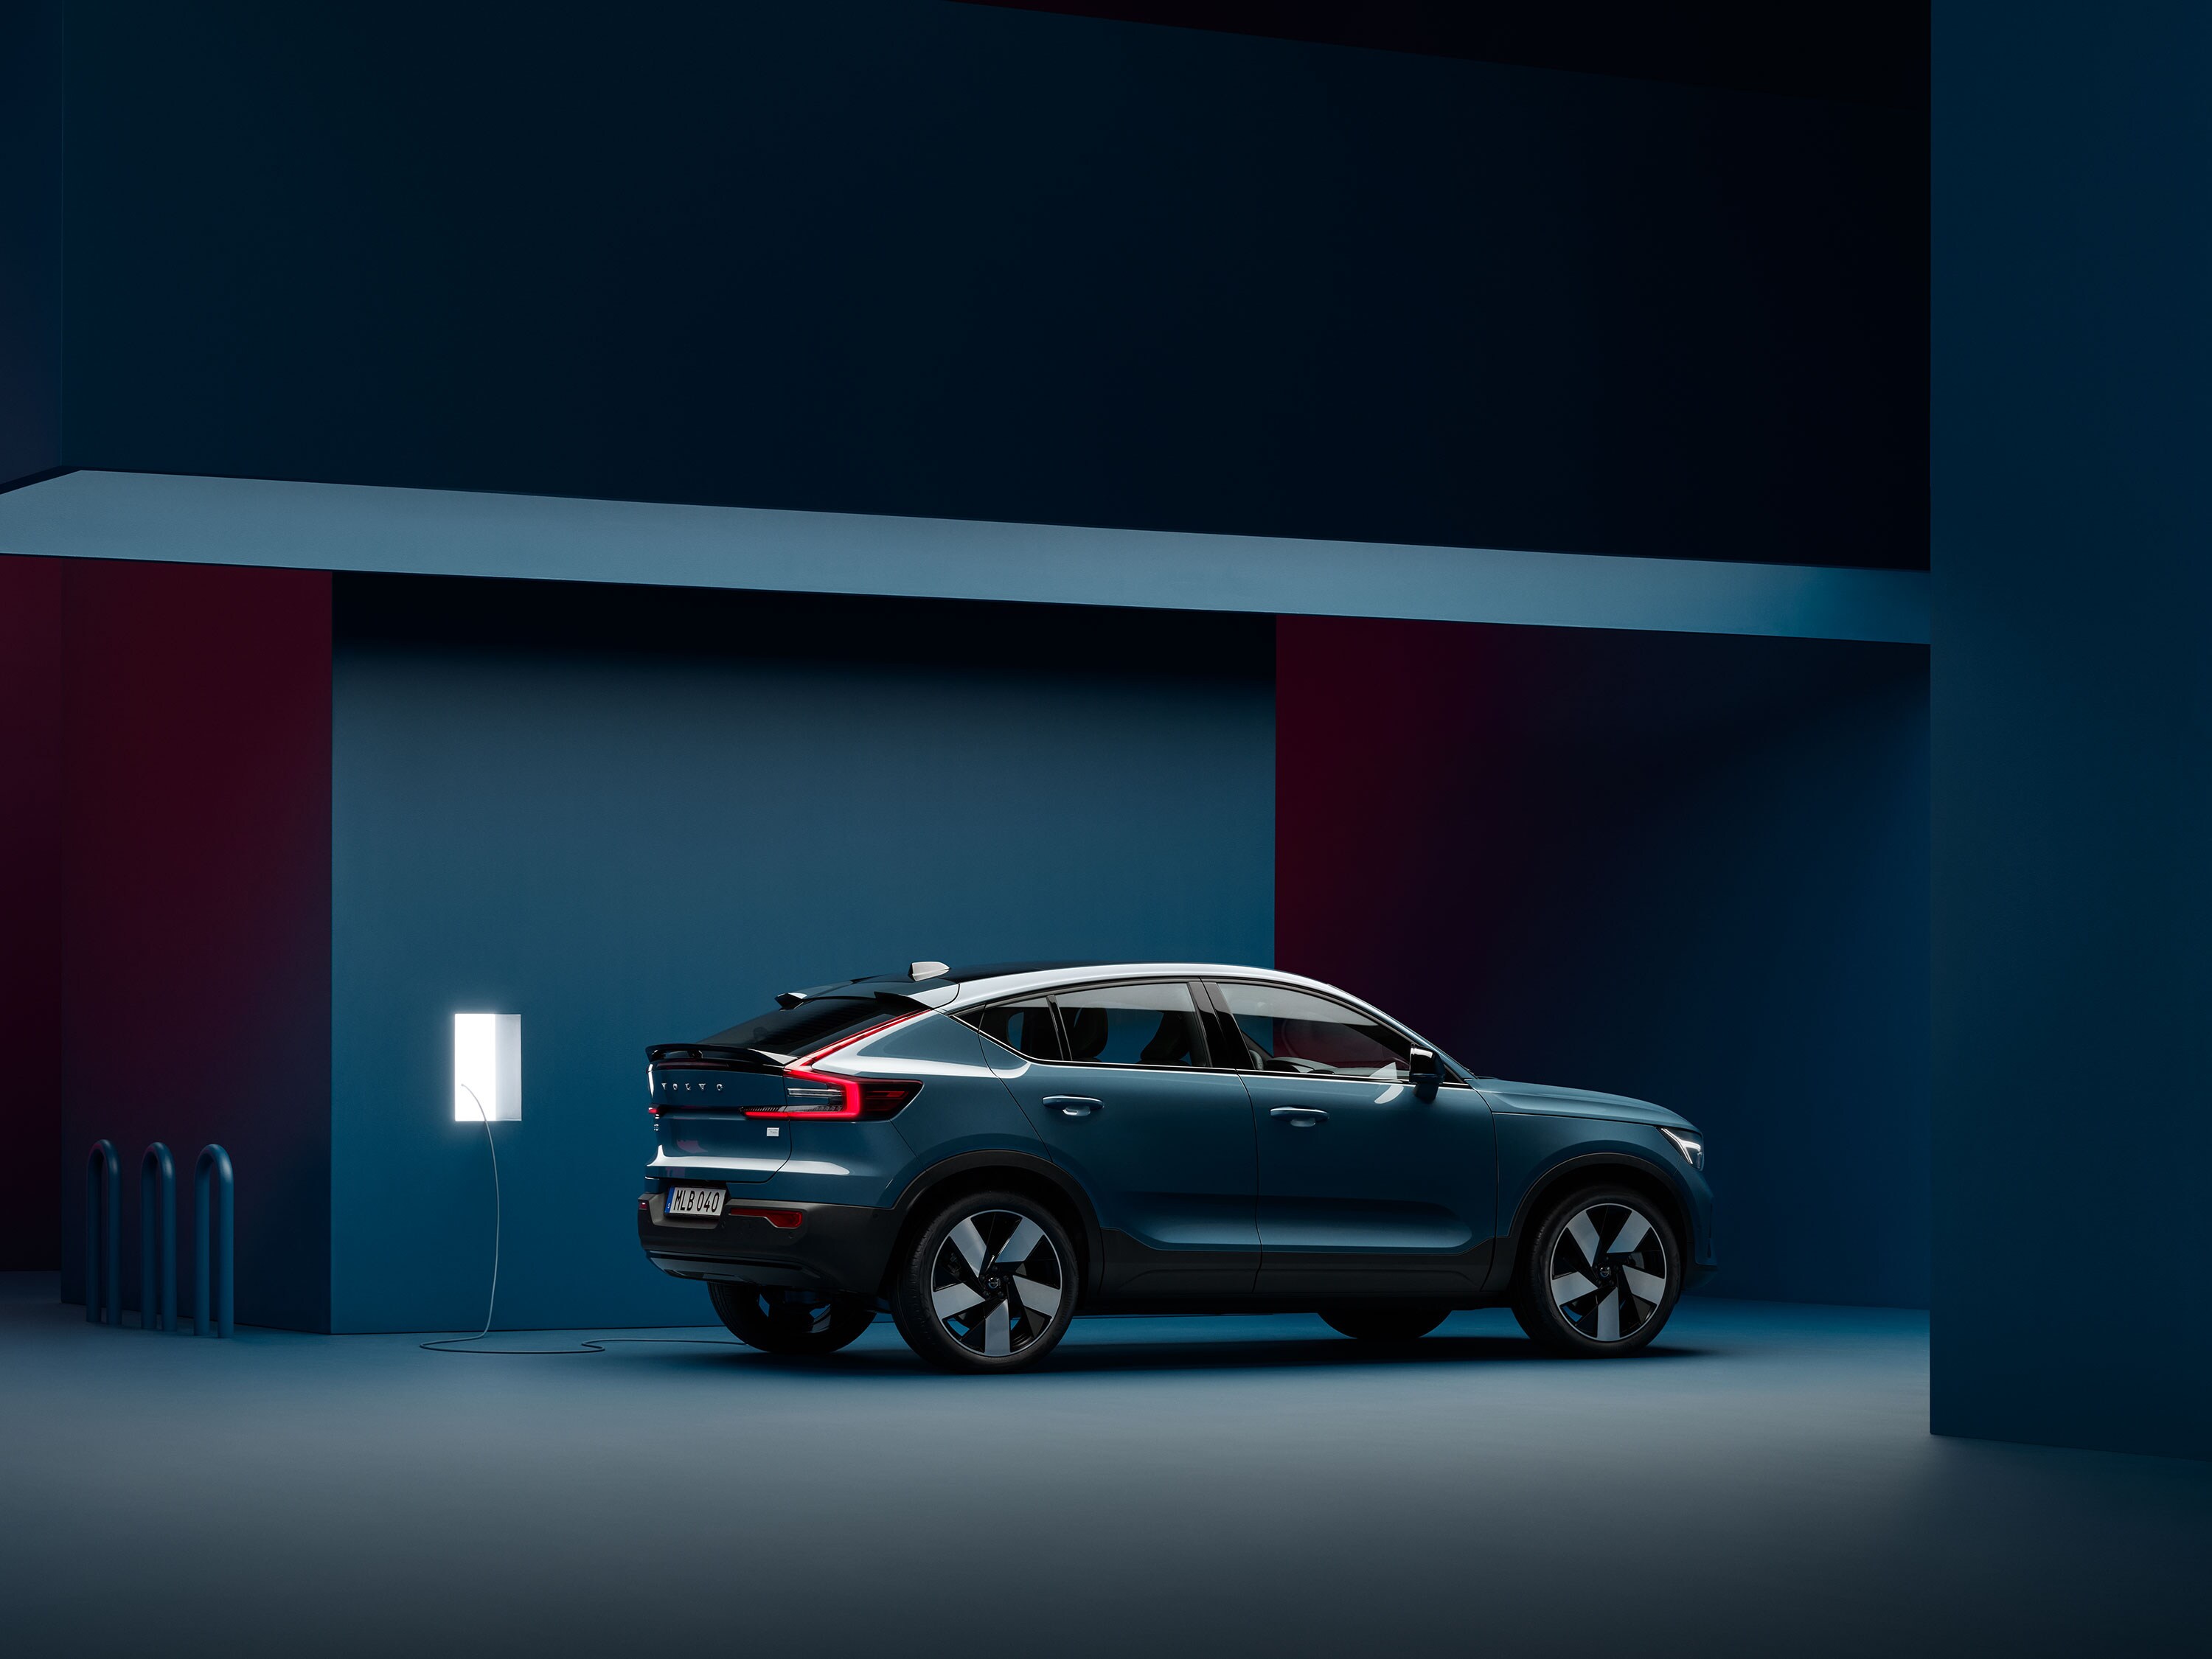 A Volvo C40 Recharge is parked in a dark blue room next to a charging station.